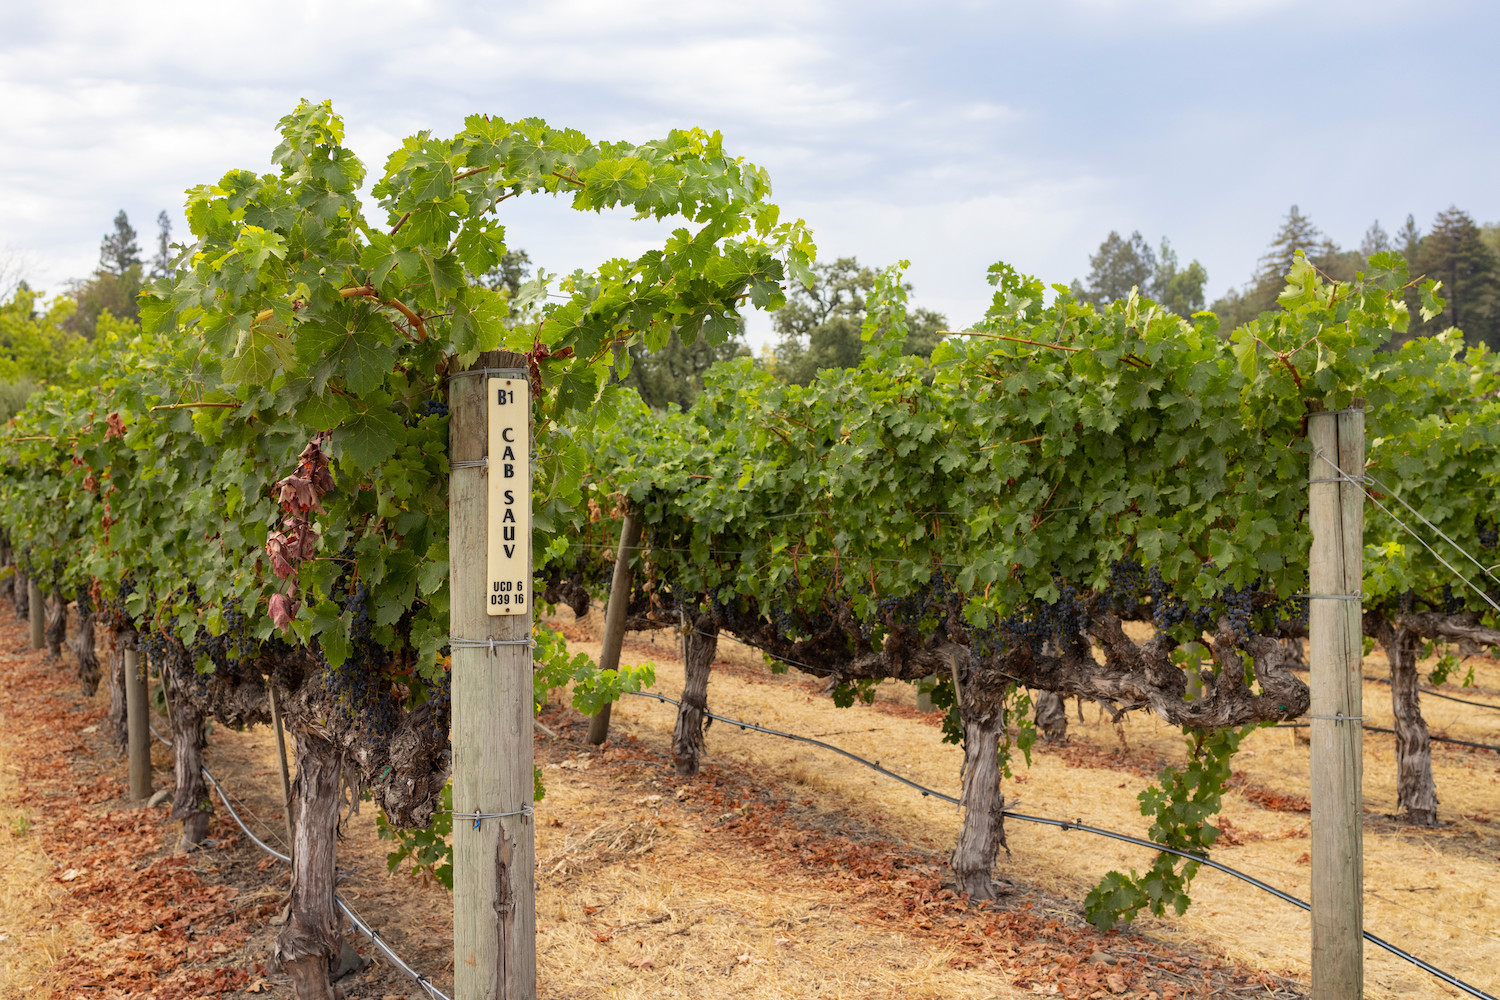 Cabernet sauvignon grapes grow on Benoist Ranch in California's Napa Valley wine country - wines and climate change